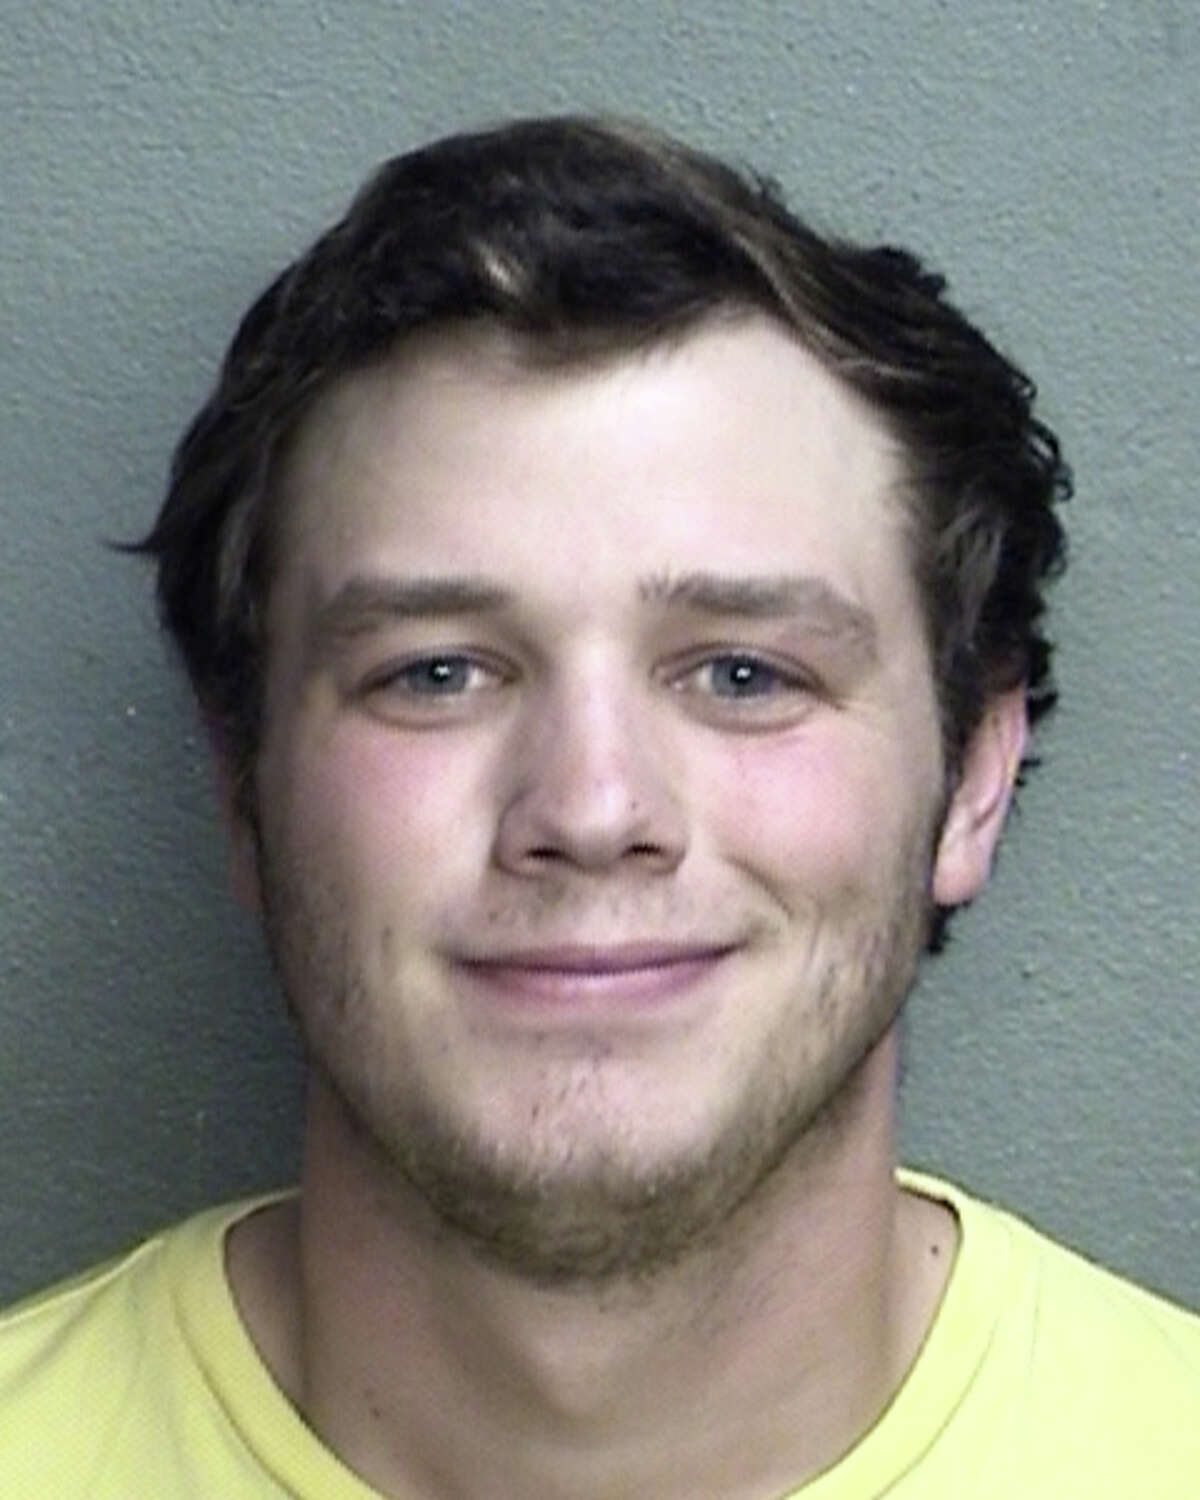 College Station resident Ty Robertson was arrested on Saturday, Aug. 20, 2016 for possession of marijuana at the house of Texas A&M fraternity Sigma Nu, where authorities found a 19-year-old fraternity member unconscious. The teen was later pronounced dead at the College Station Medical Center.